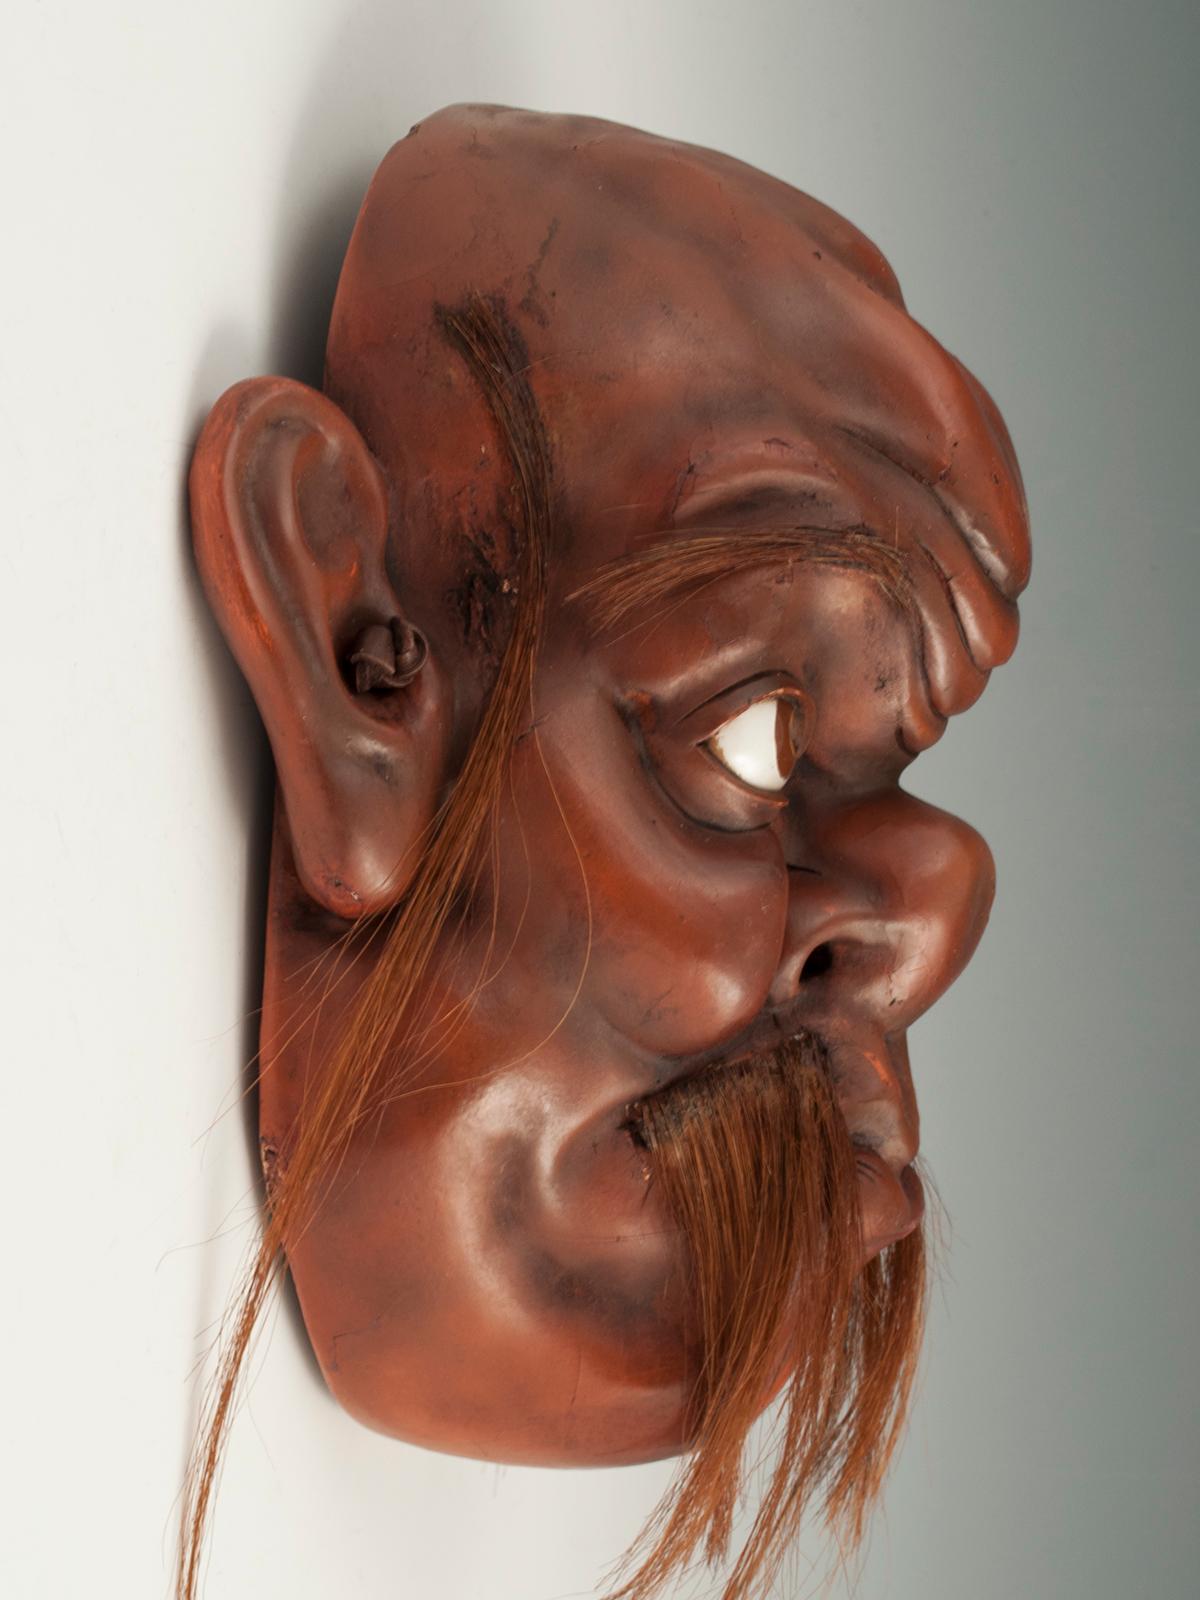 Offered by Zena Kruzick
Iki Ningyo Face, Meiji period, Japan

A rather grotesque medium-sized example of iki-ningyo (living doll) from Japan. This was a cultural phenomenon in the evolution of doll-making in Japan that began in 1852 with an